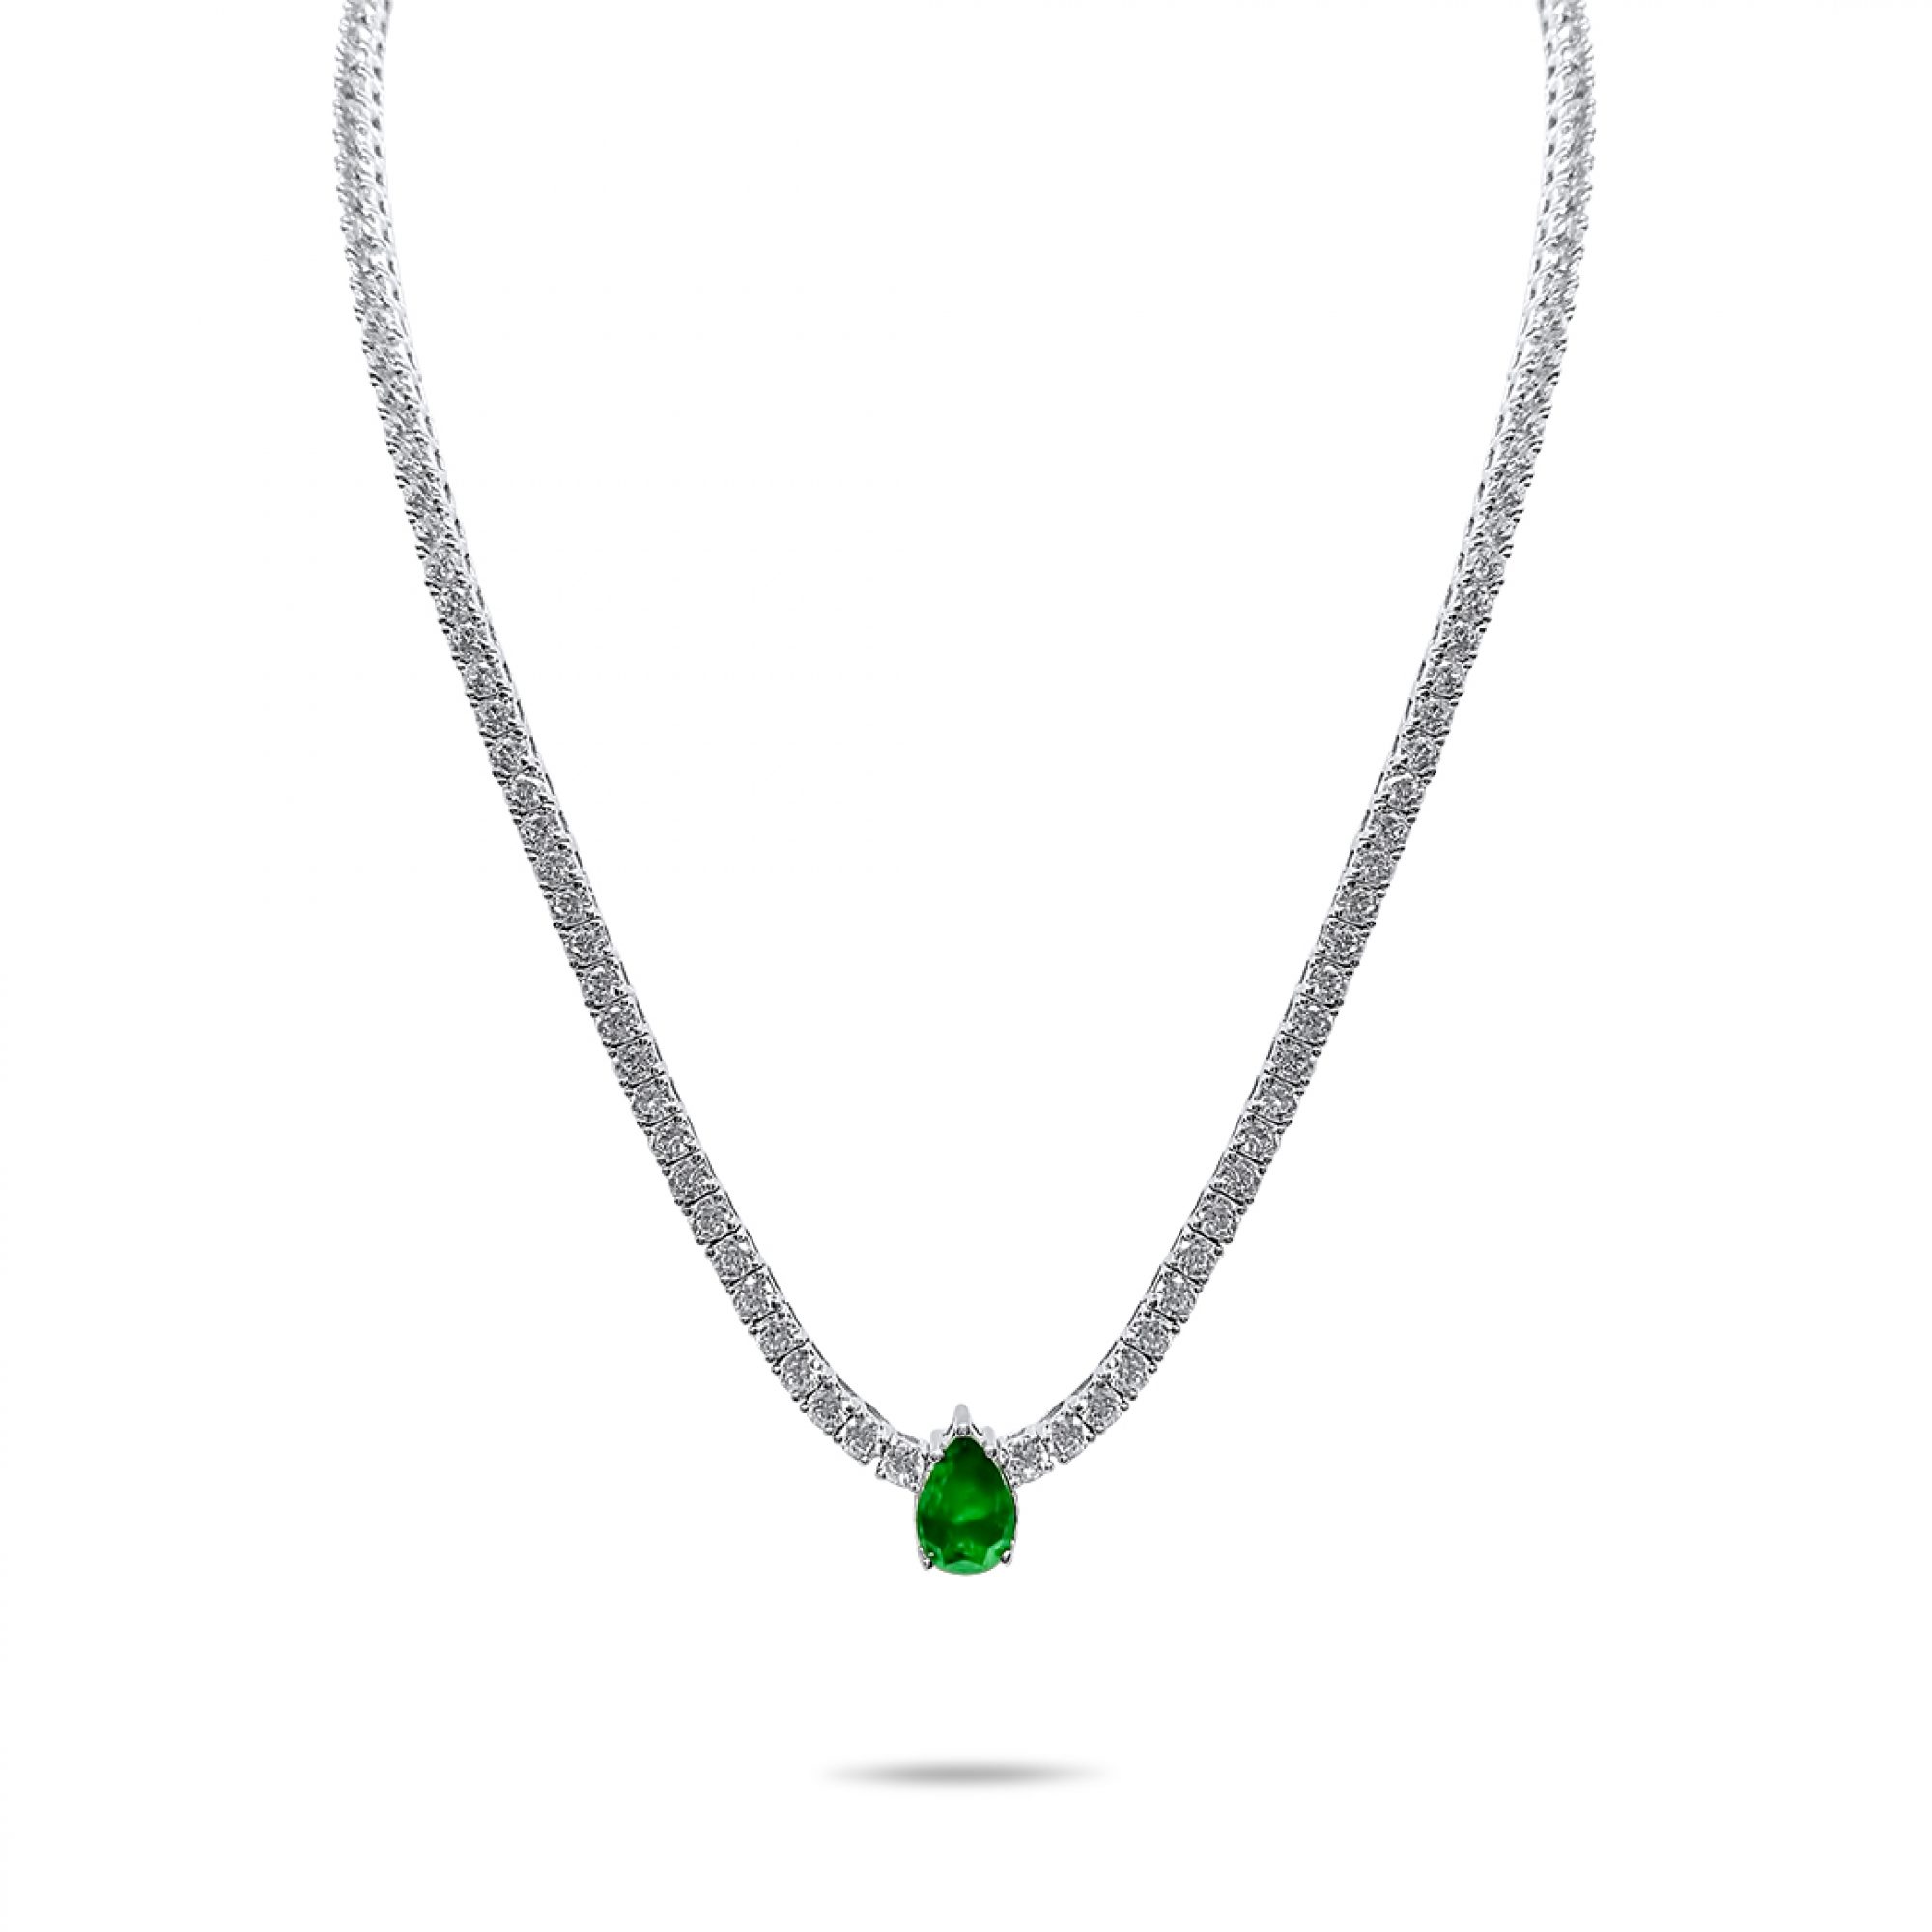 Silver necklace with emerald and zircon stones